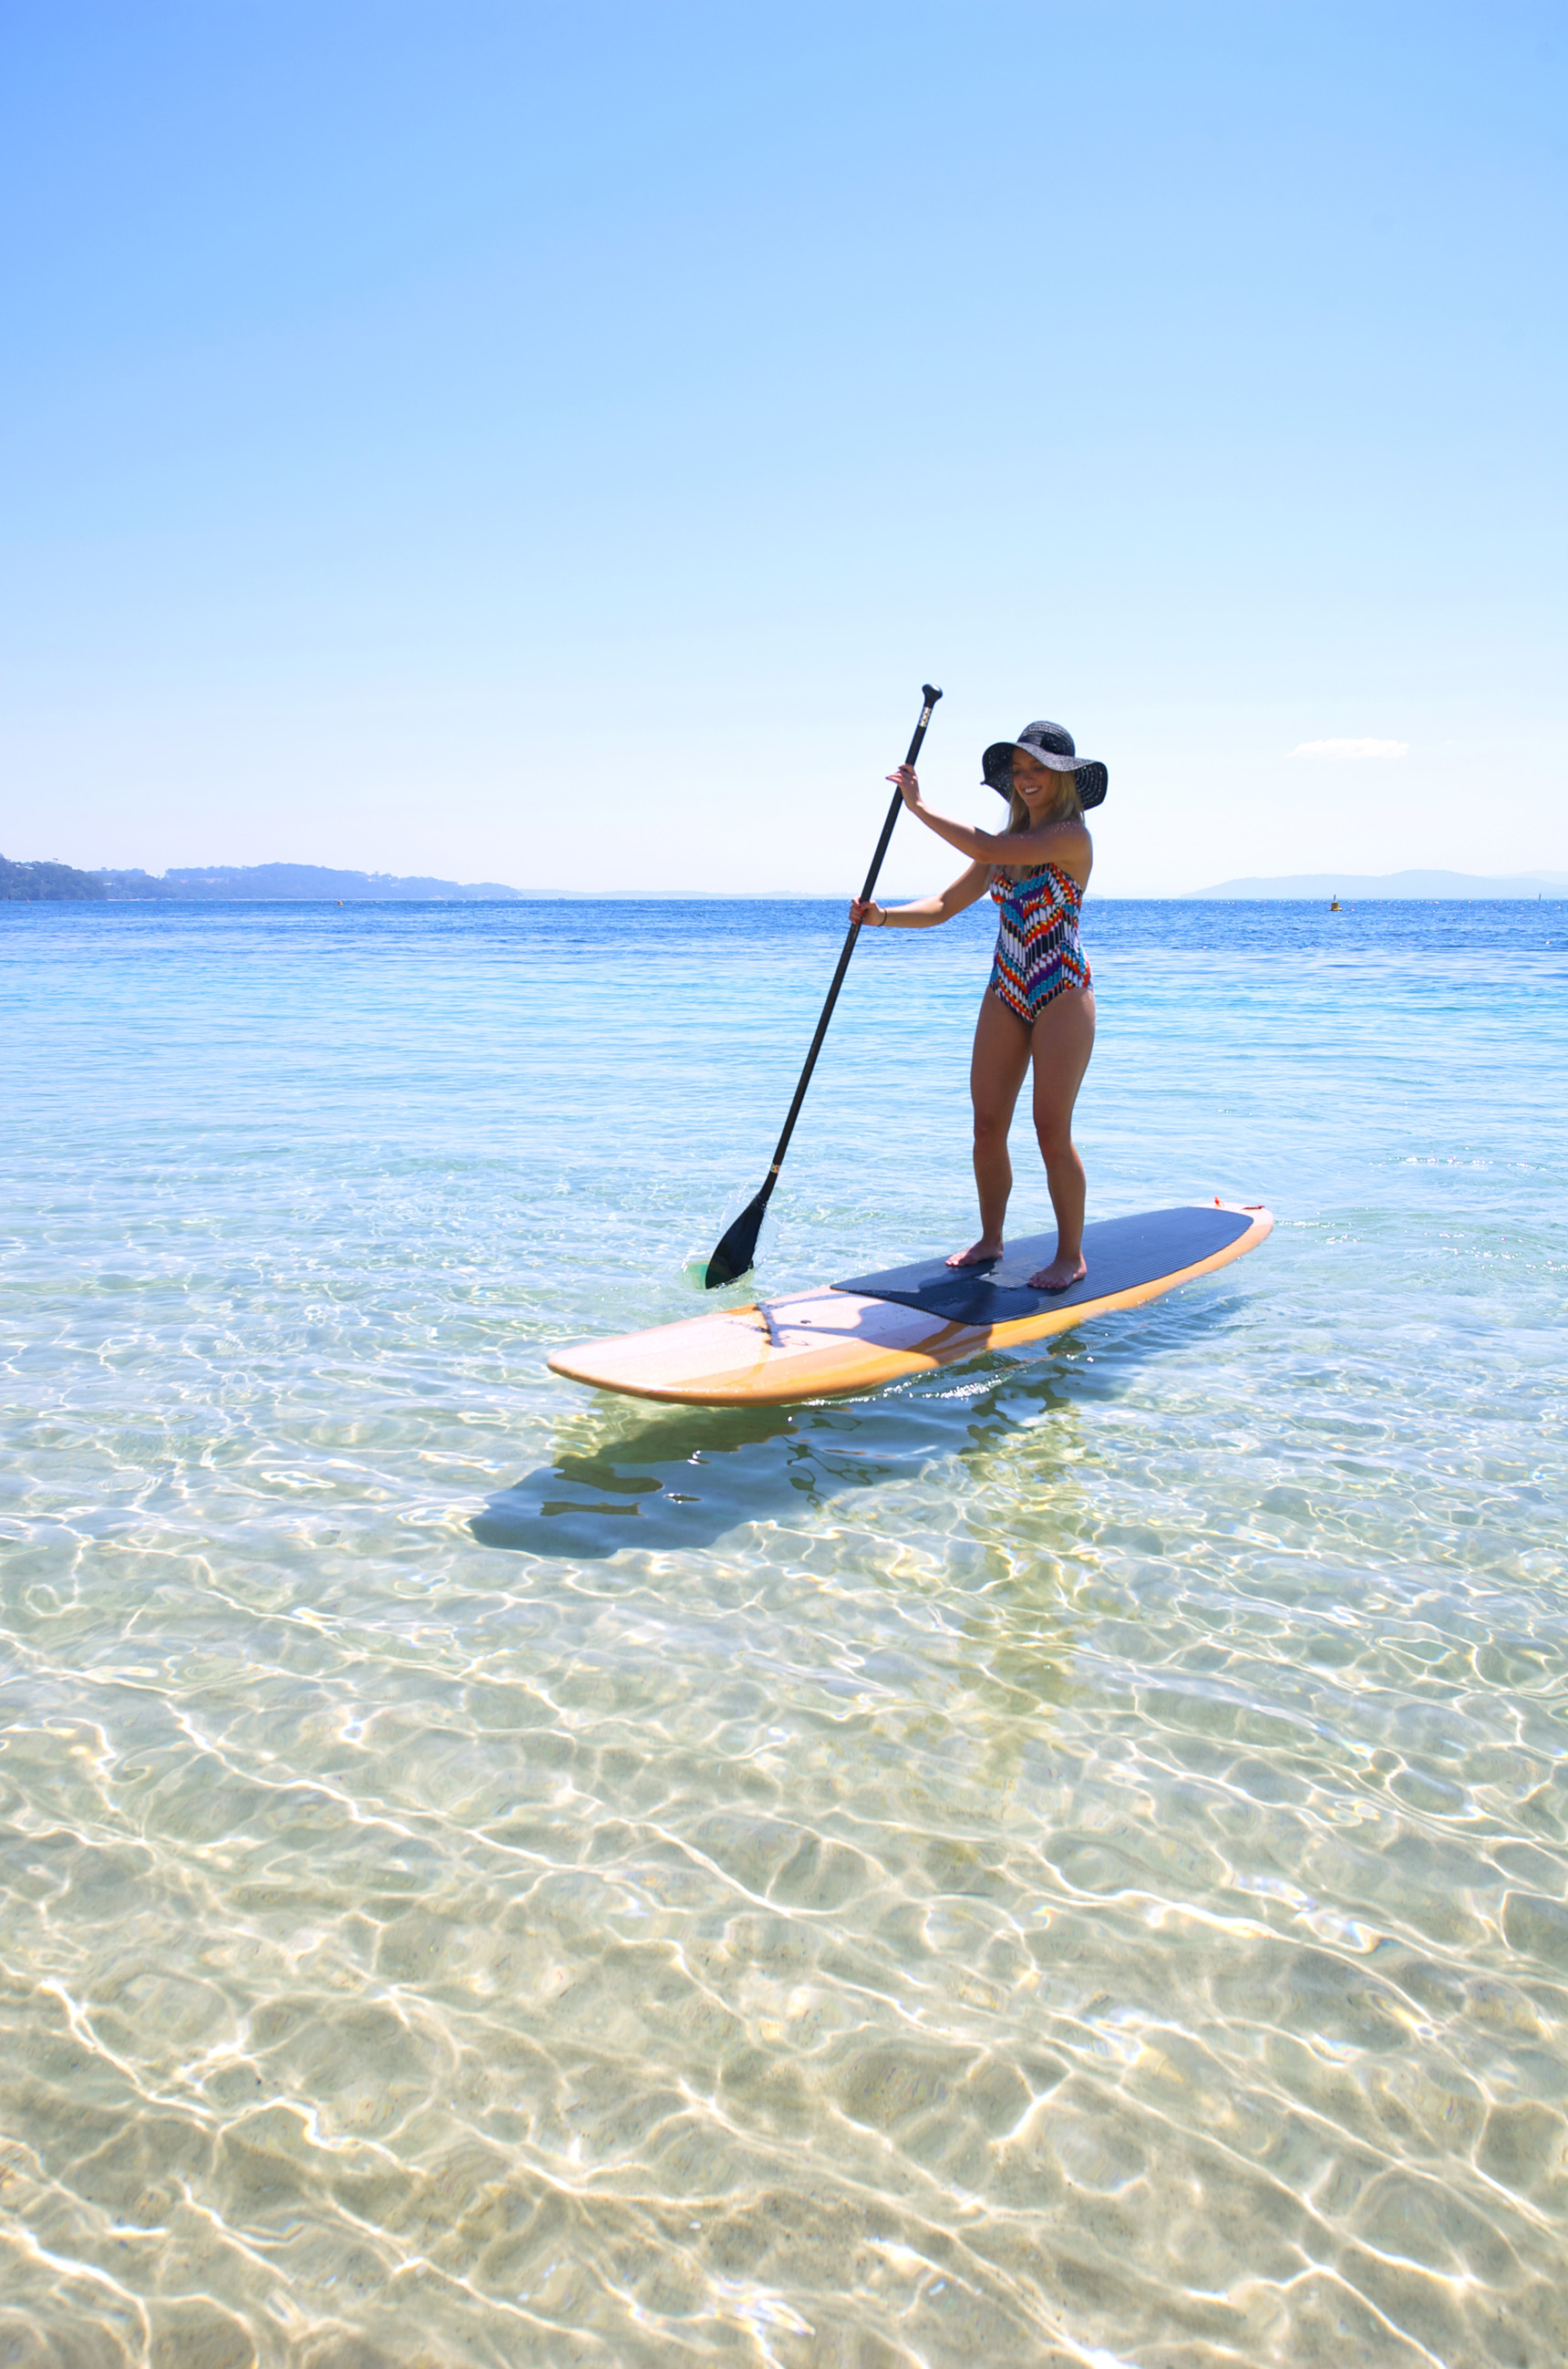 Nelson Bay is perfect for Stand Up Paddleboarding